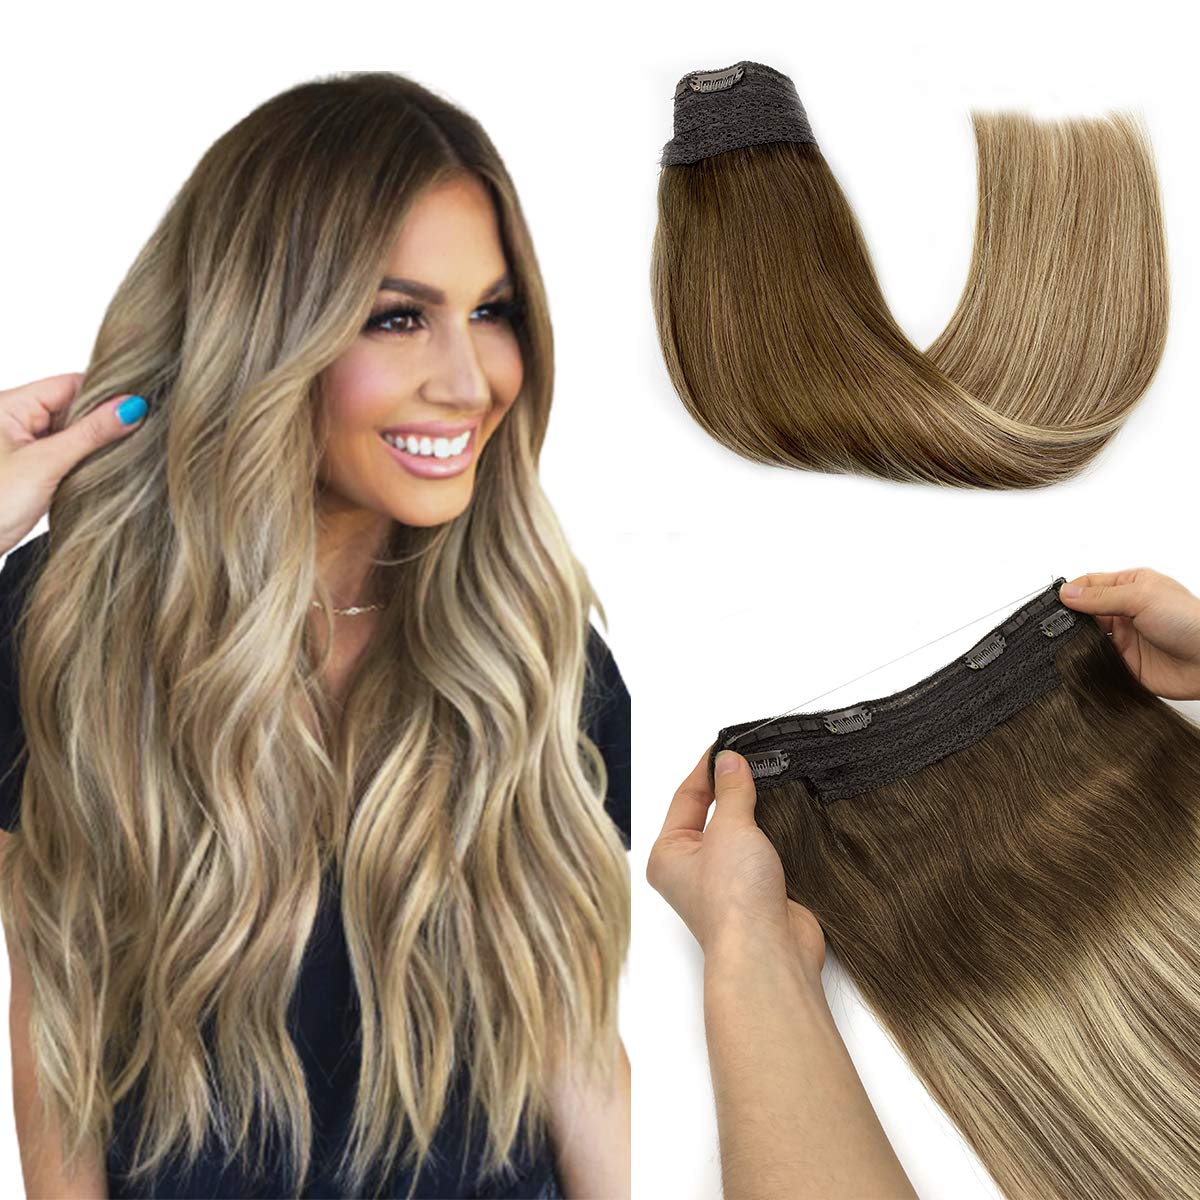 Haloo Hair Extensions, Fish Line Human Hair Extensions, Flip in Remy Hair Extensions, Walnut Brown to Ash Brown and Bleach Blonde Secret Hair Extension, Straight Hidden Wire Hair Extensions, 12 inch